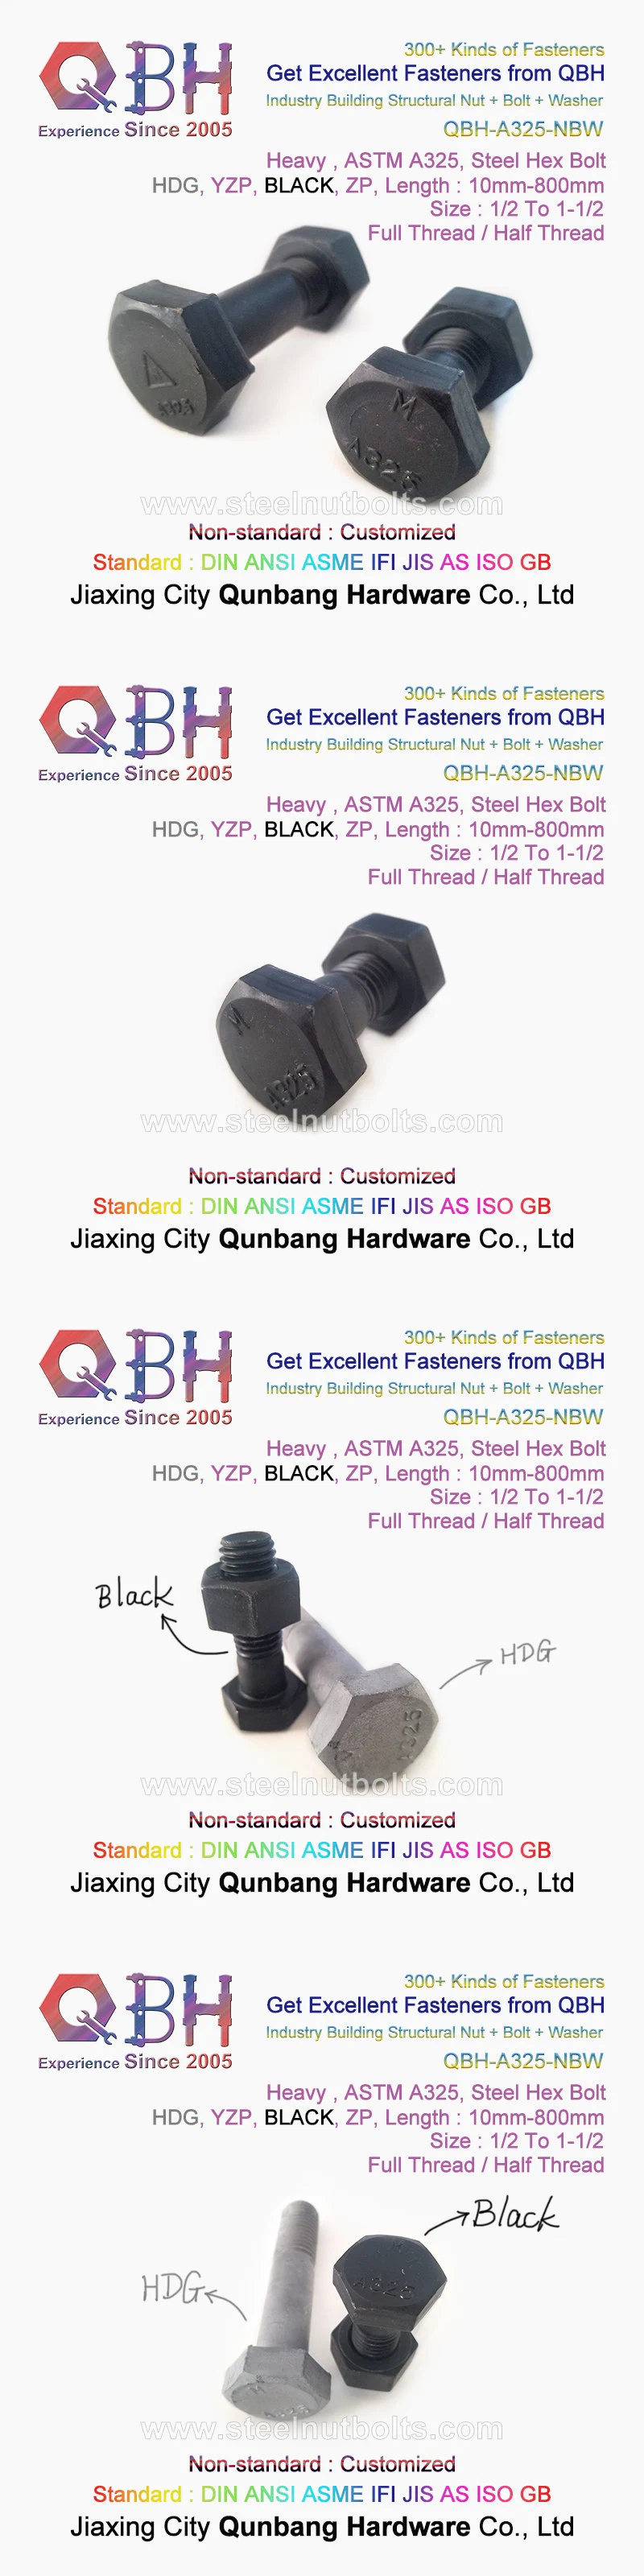 Qbh Steel Structure Construction ASTM A325m 2h Nut F436m Plain Washer Assembly